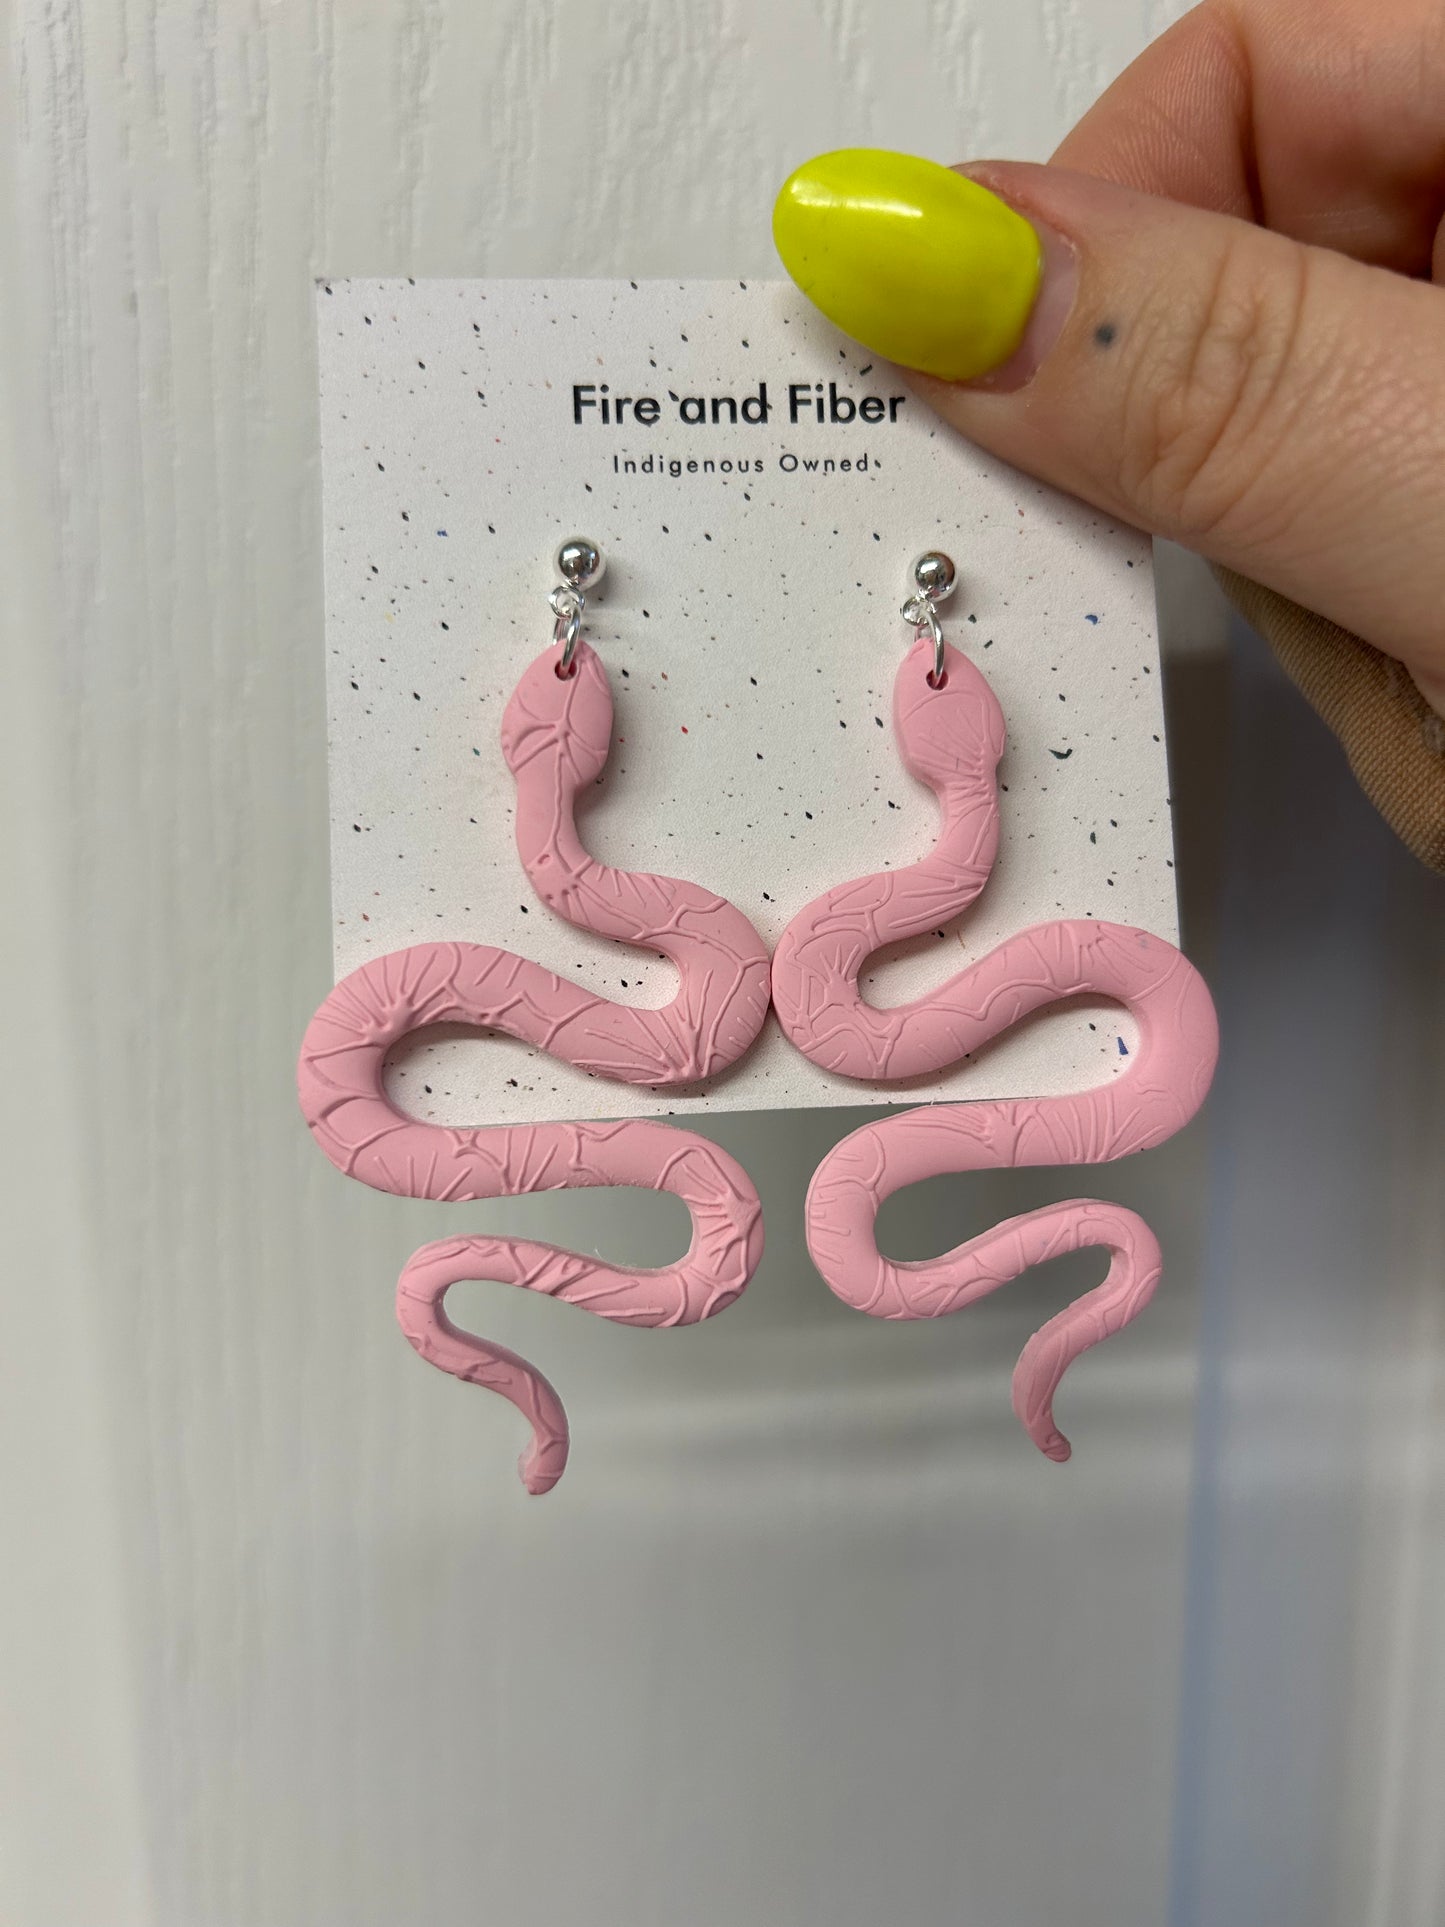 Polymer Clay Snakes